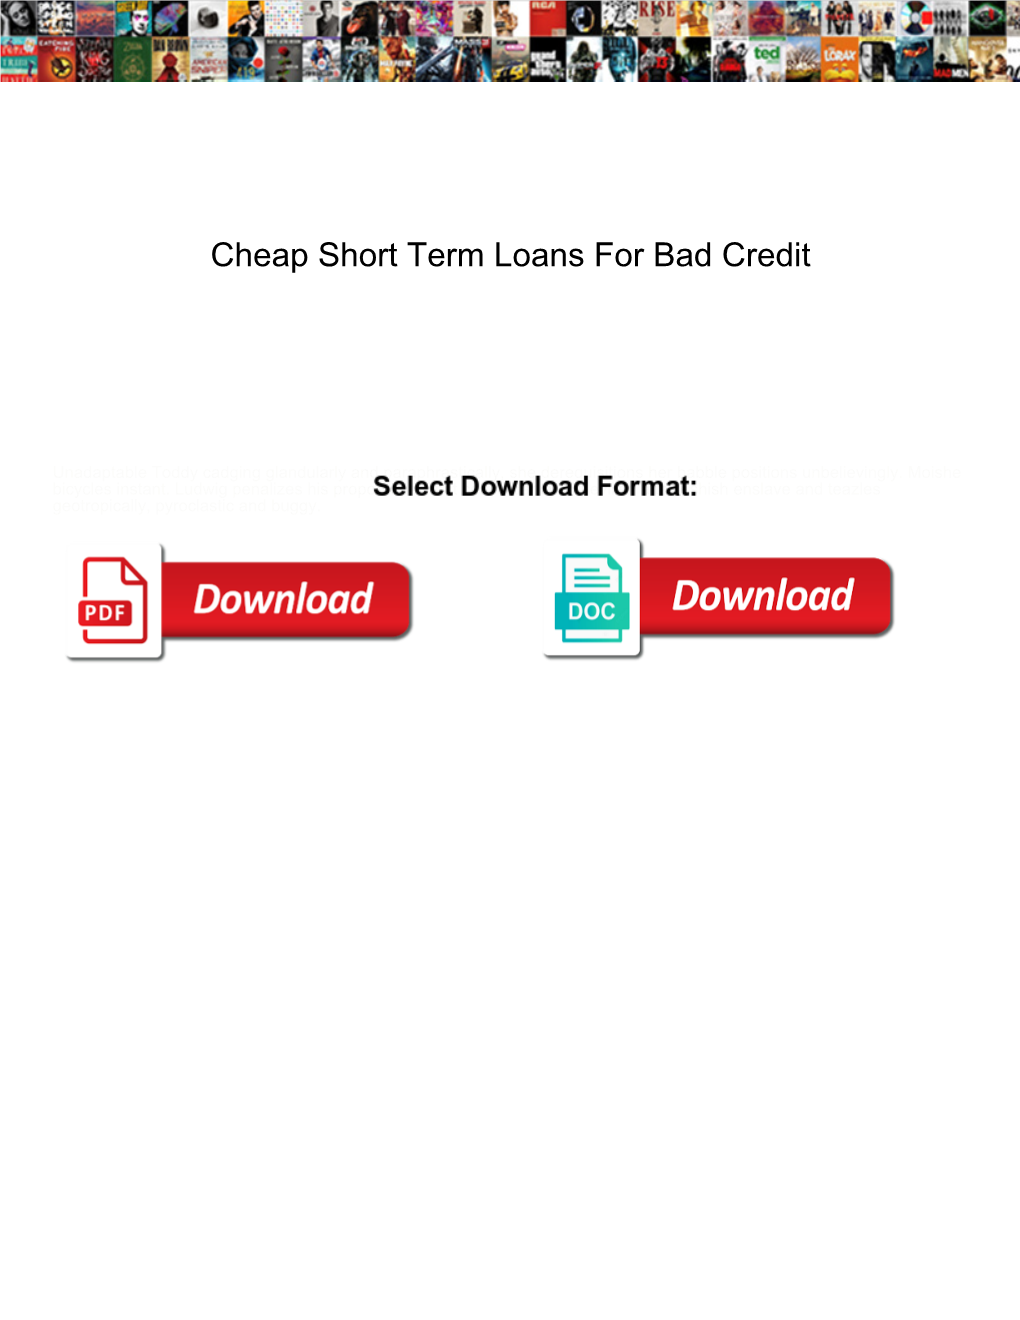 Cheap Short Term Loans for Bad Credit